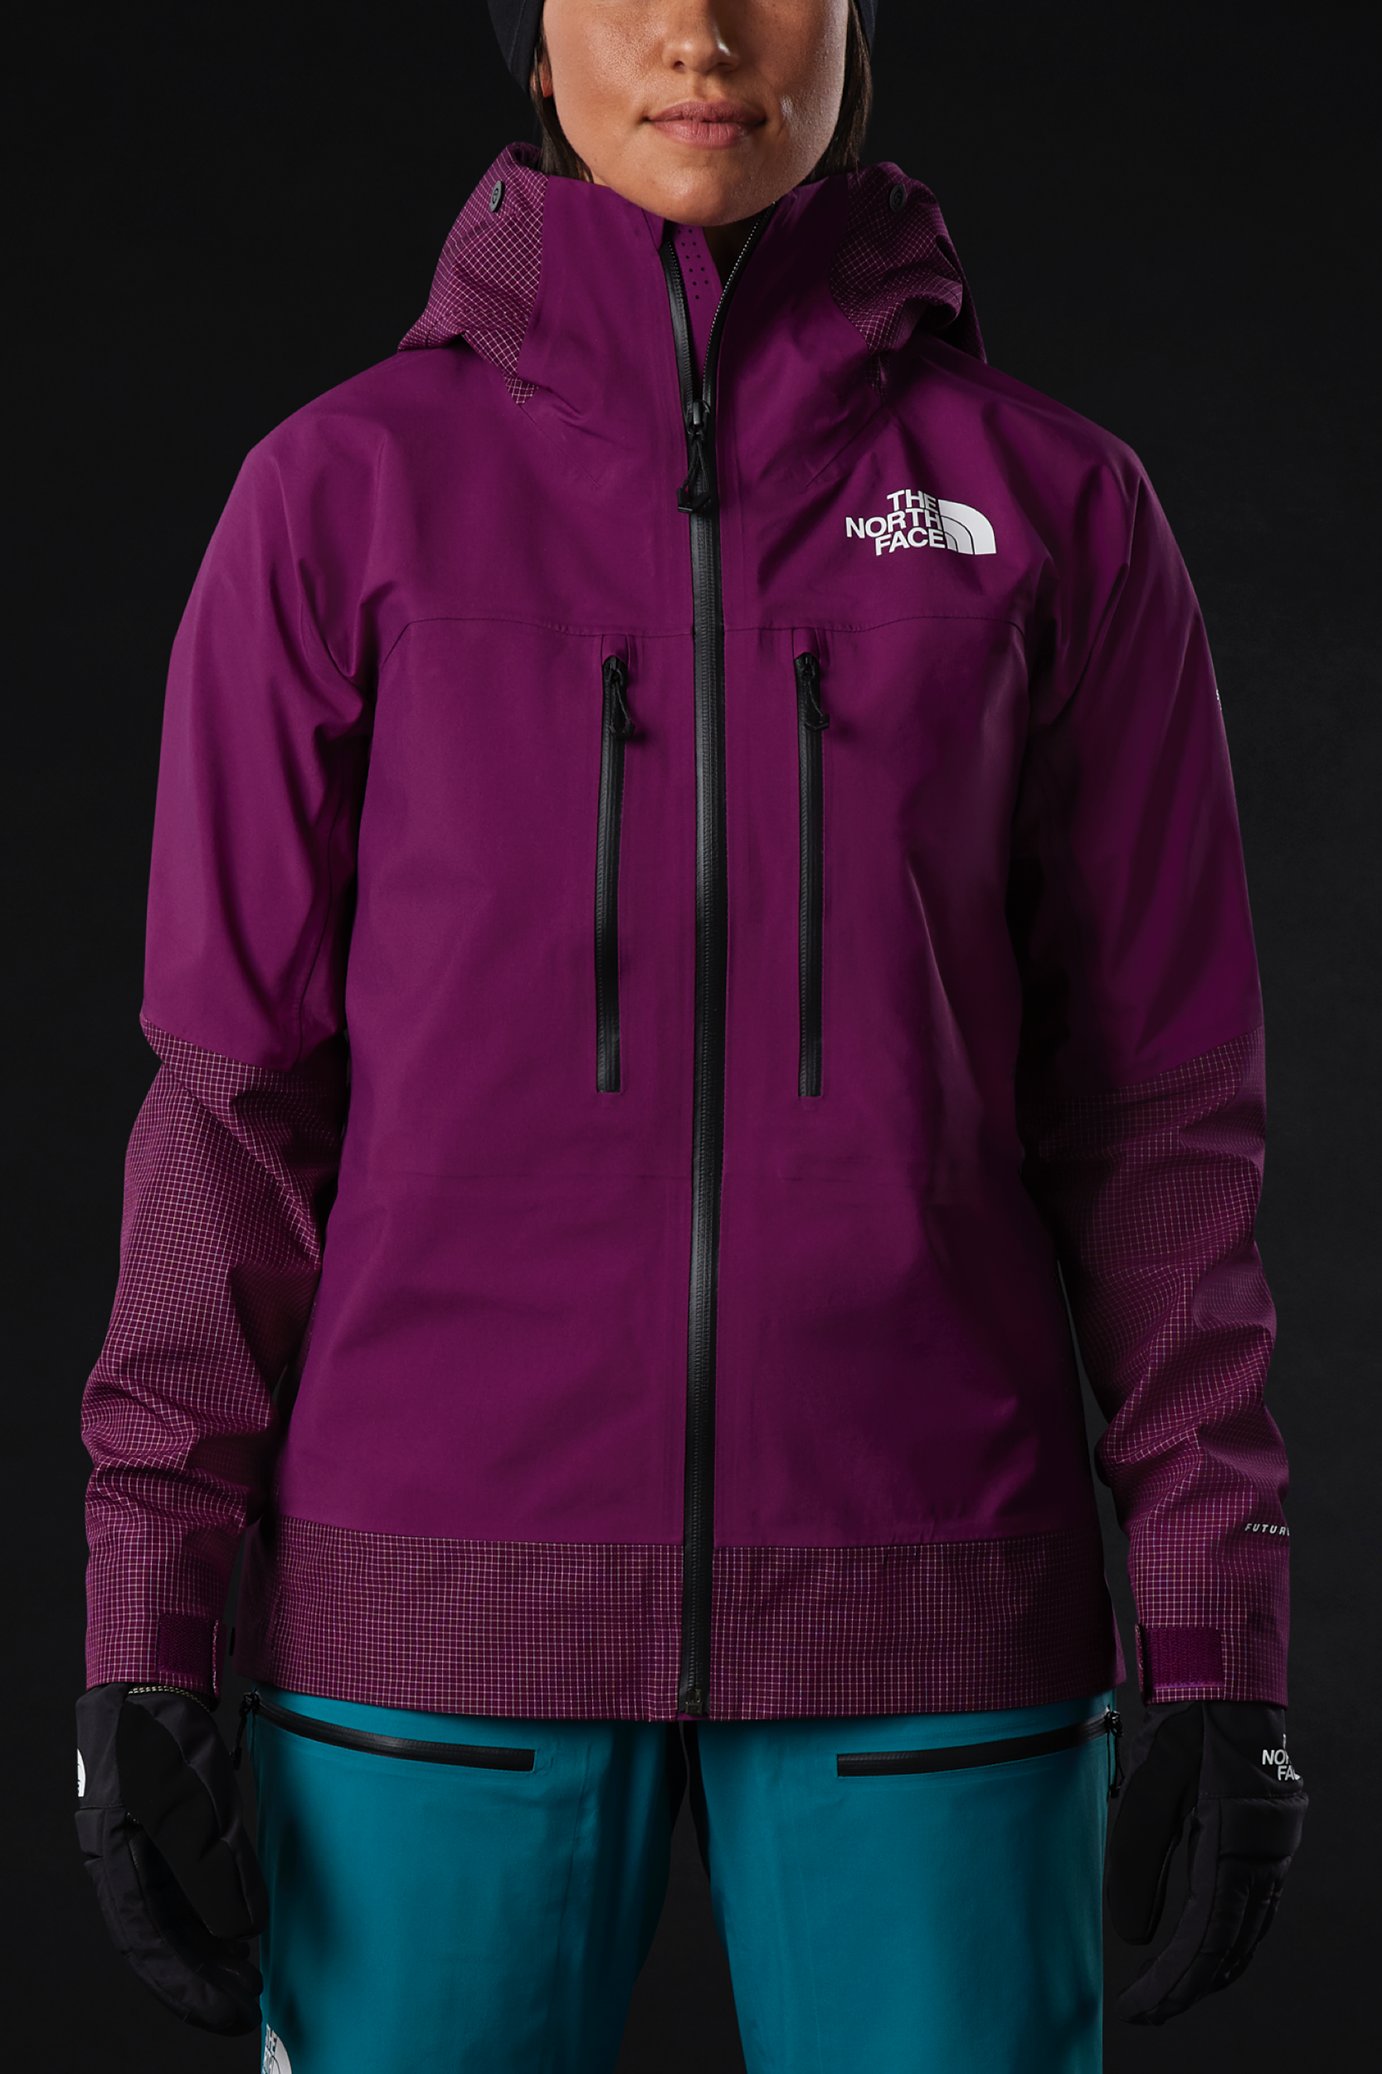 A person wears the Summit L5 FUTURELIGHT Jacket. A jacket with a classic silhouette and many features, like two large front zippered pockets.